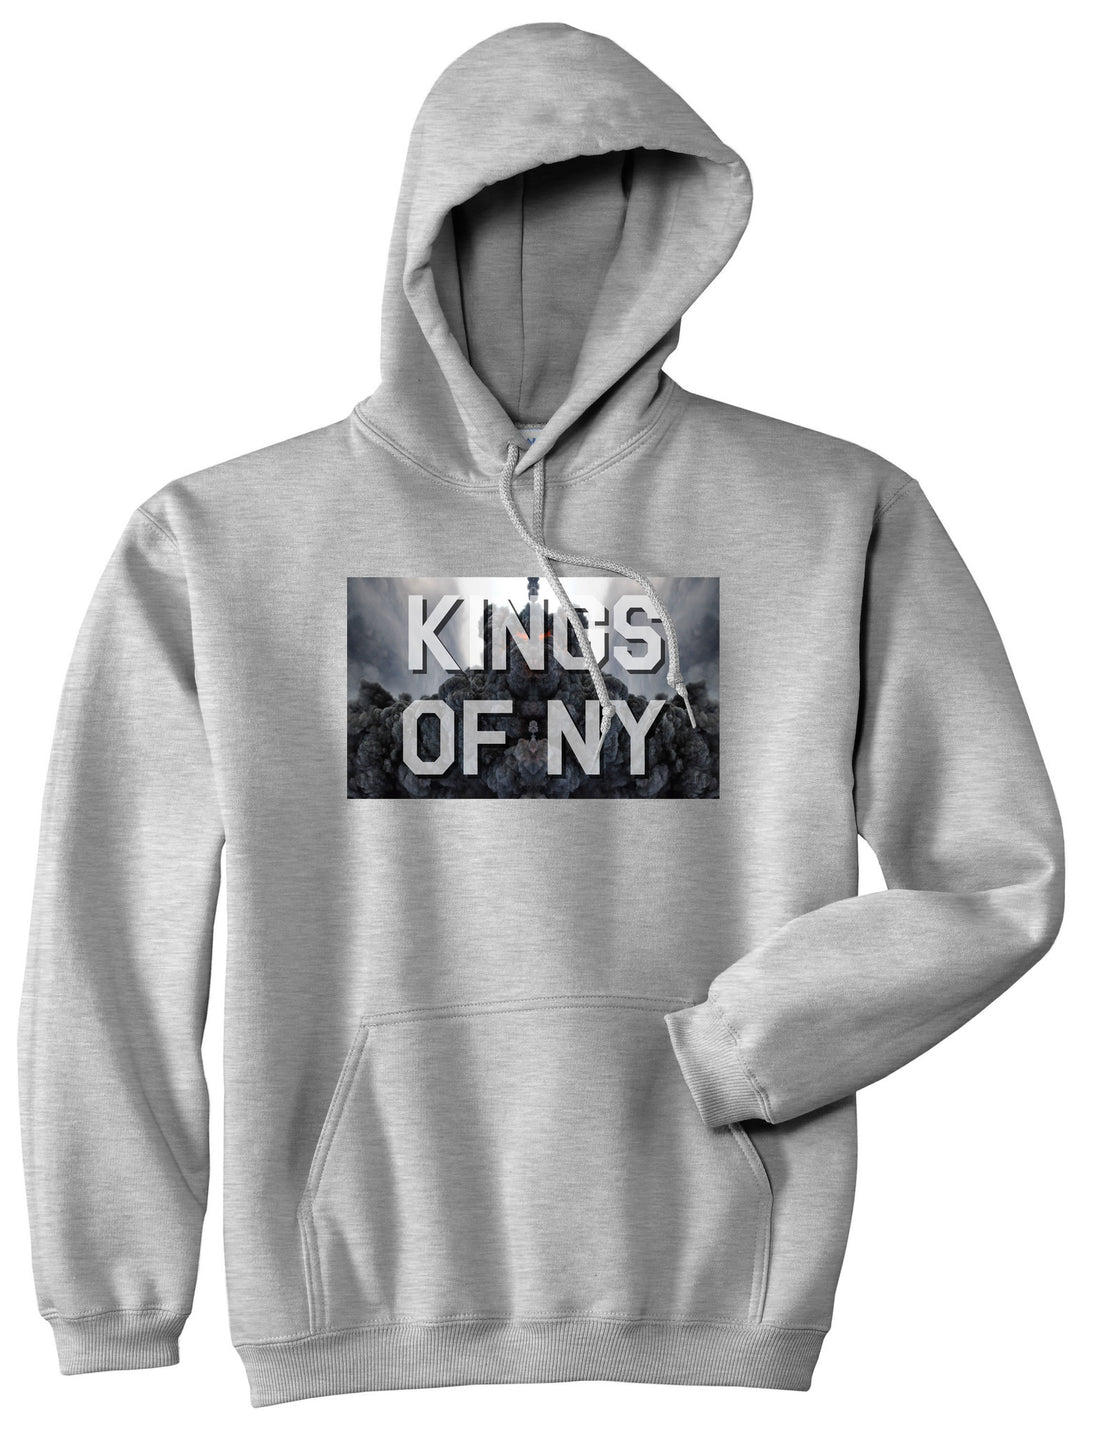 Smoke Cloud End Of Days Kings Of NY Logo Pullover Hoodie in Grey By Kings Of NY